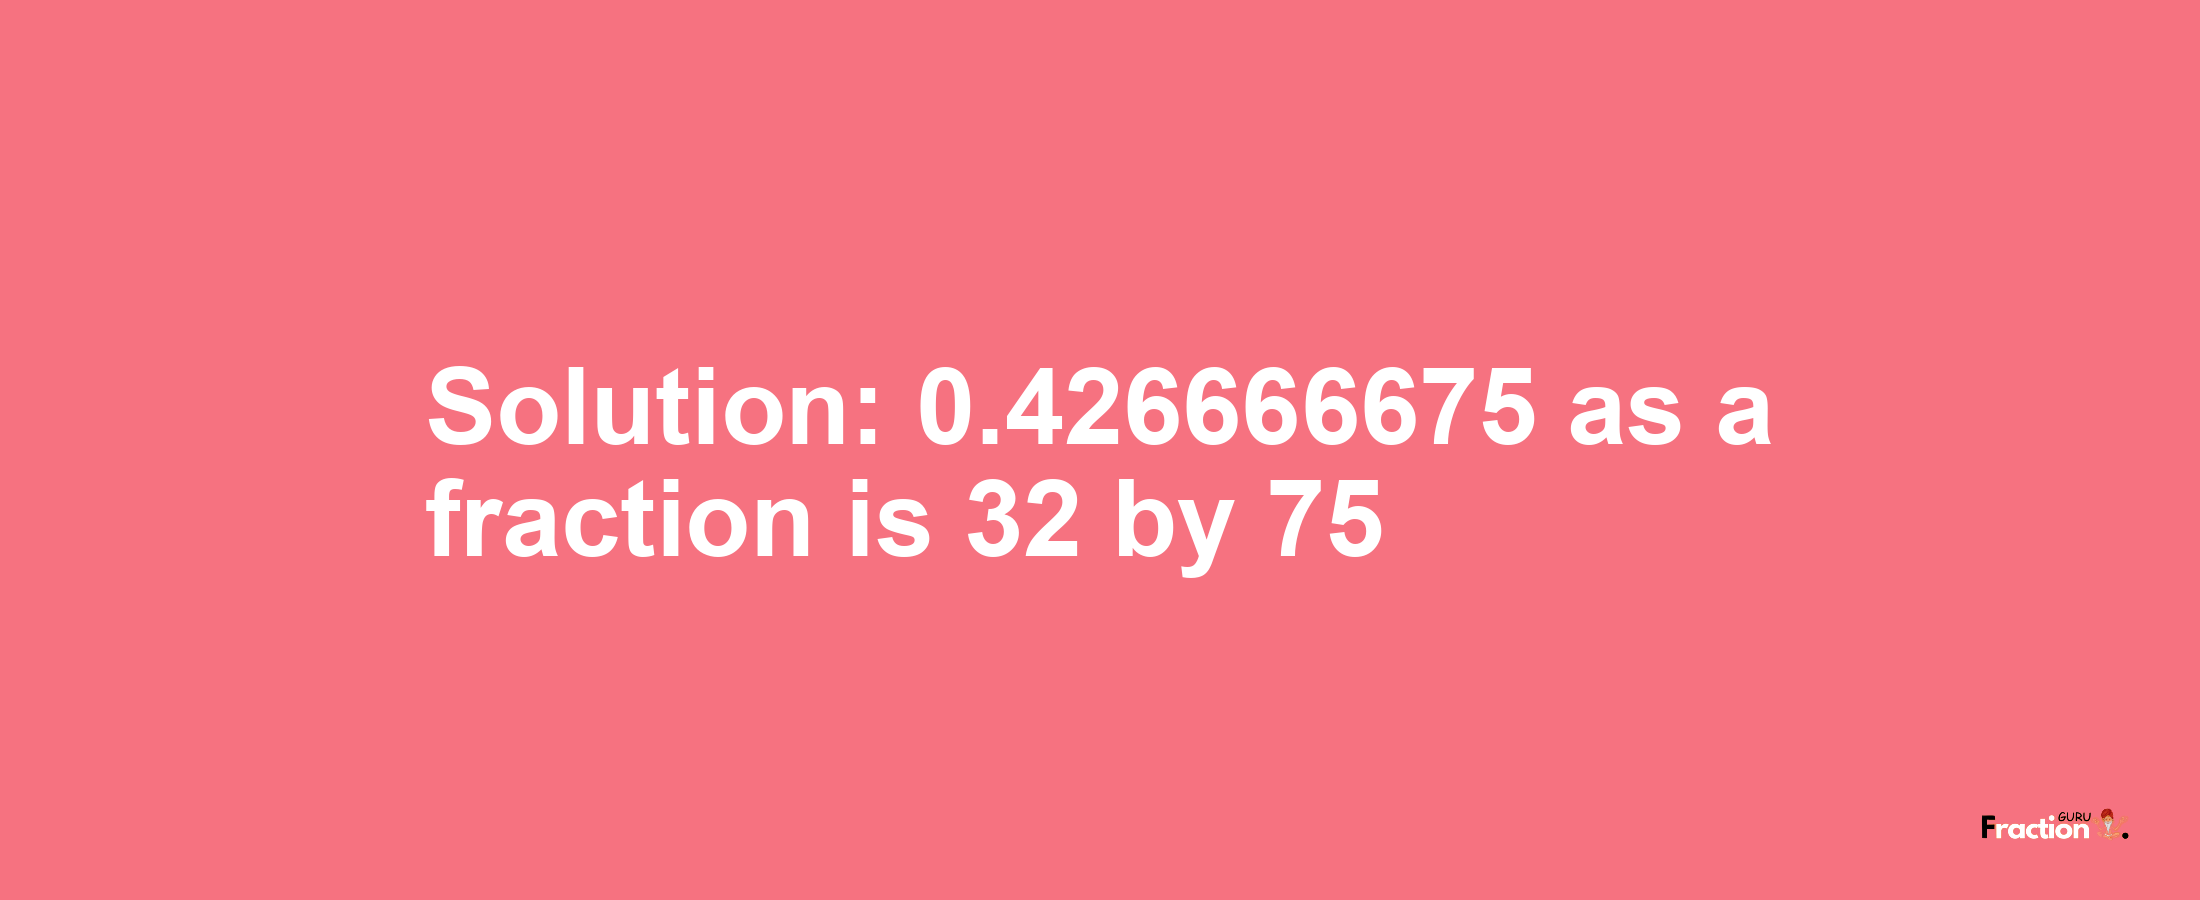 Solution:0.426666675 as a fraction is 32/75